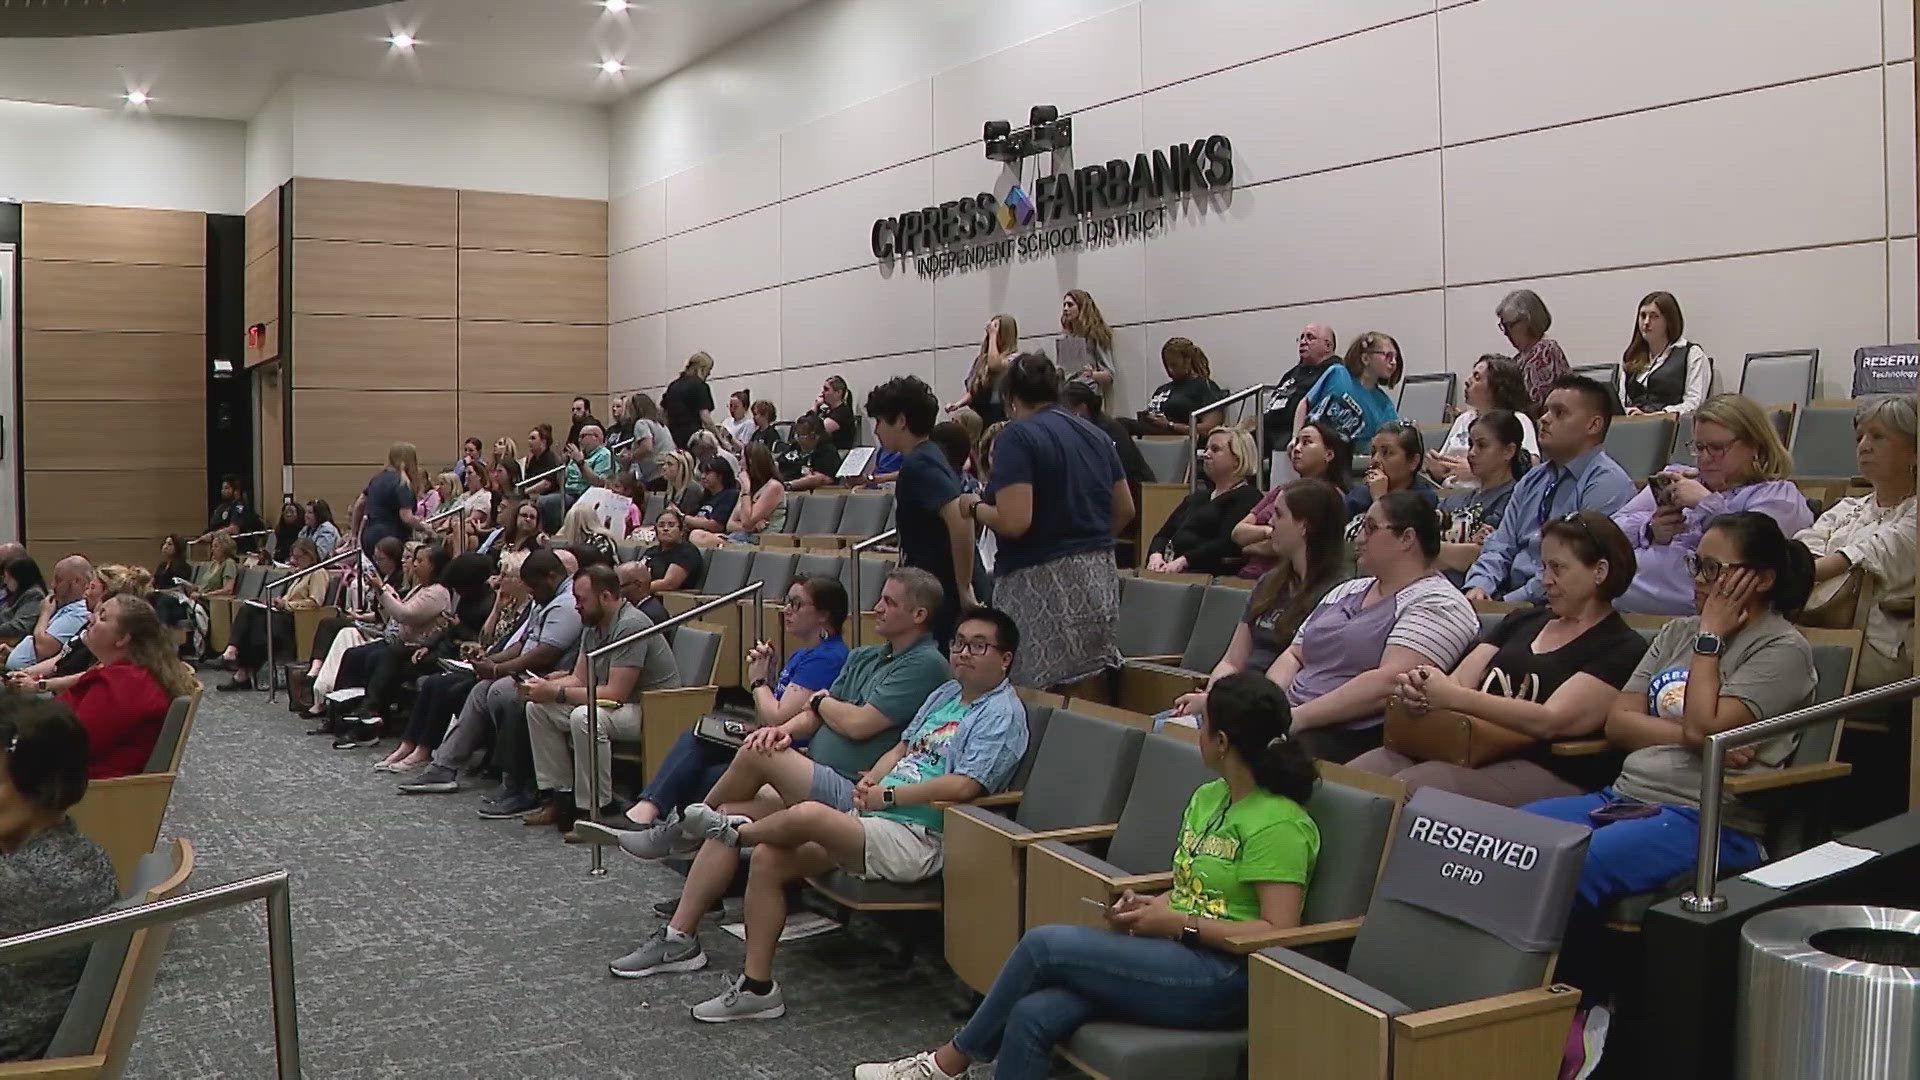 The CFISD school board voted to remove chapters that reference climate change, vaccines and diversity."We need to be appalled at these actions," an ex-member said.